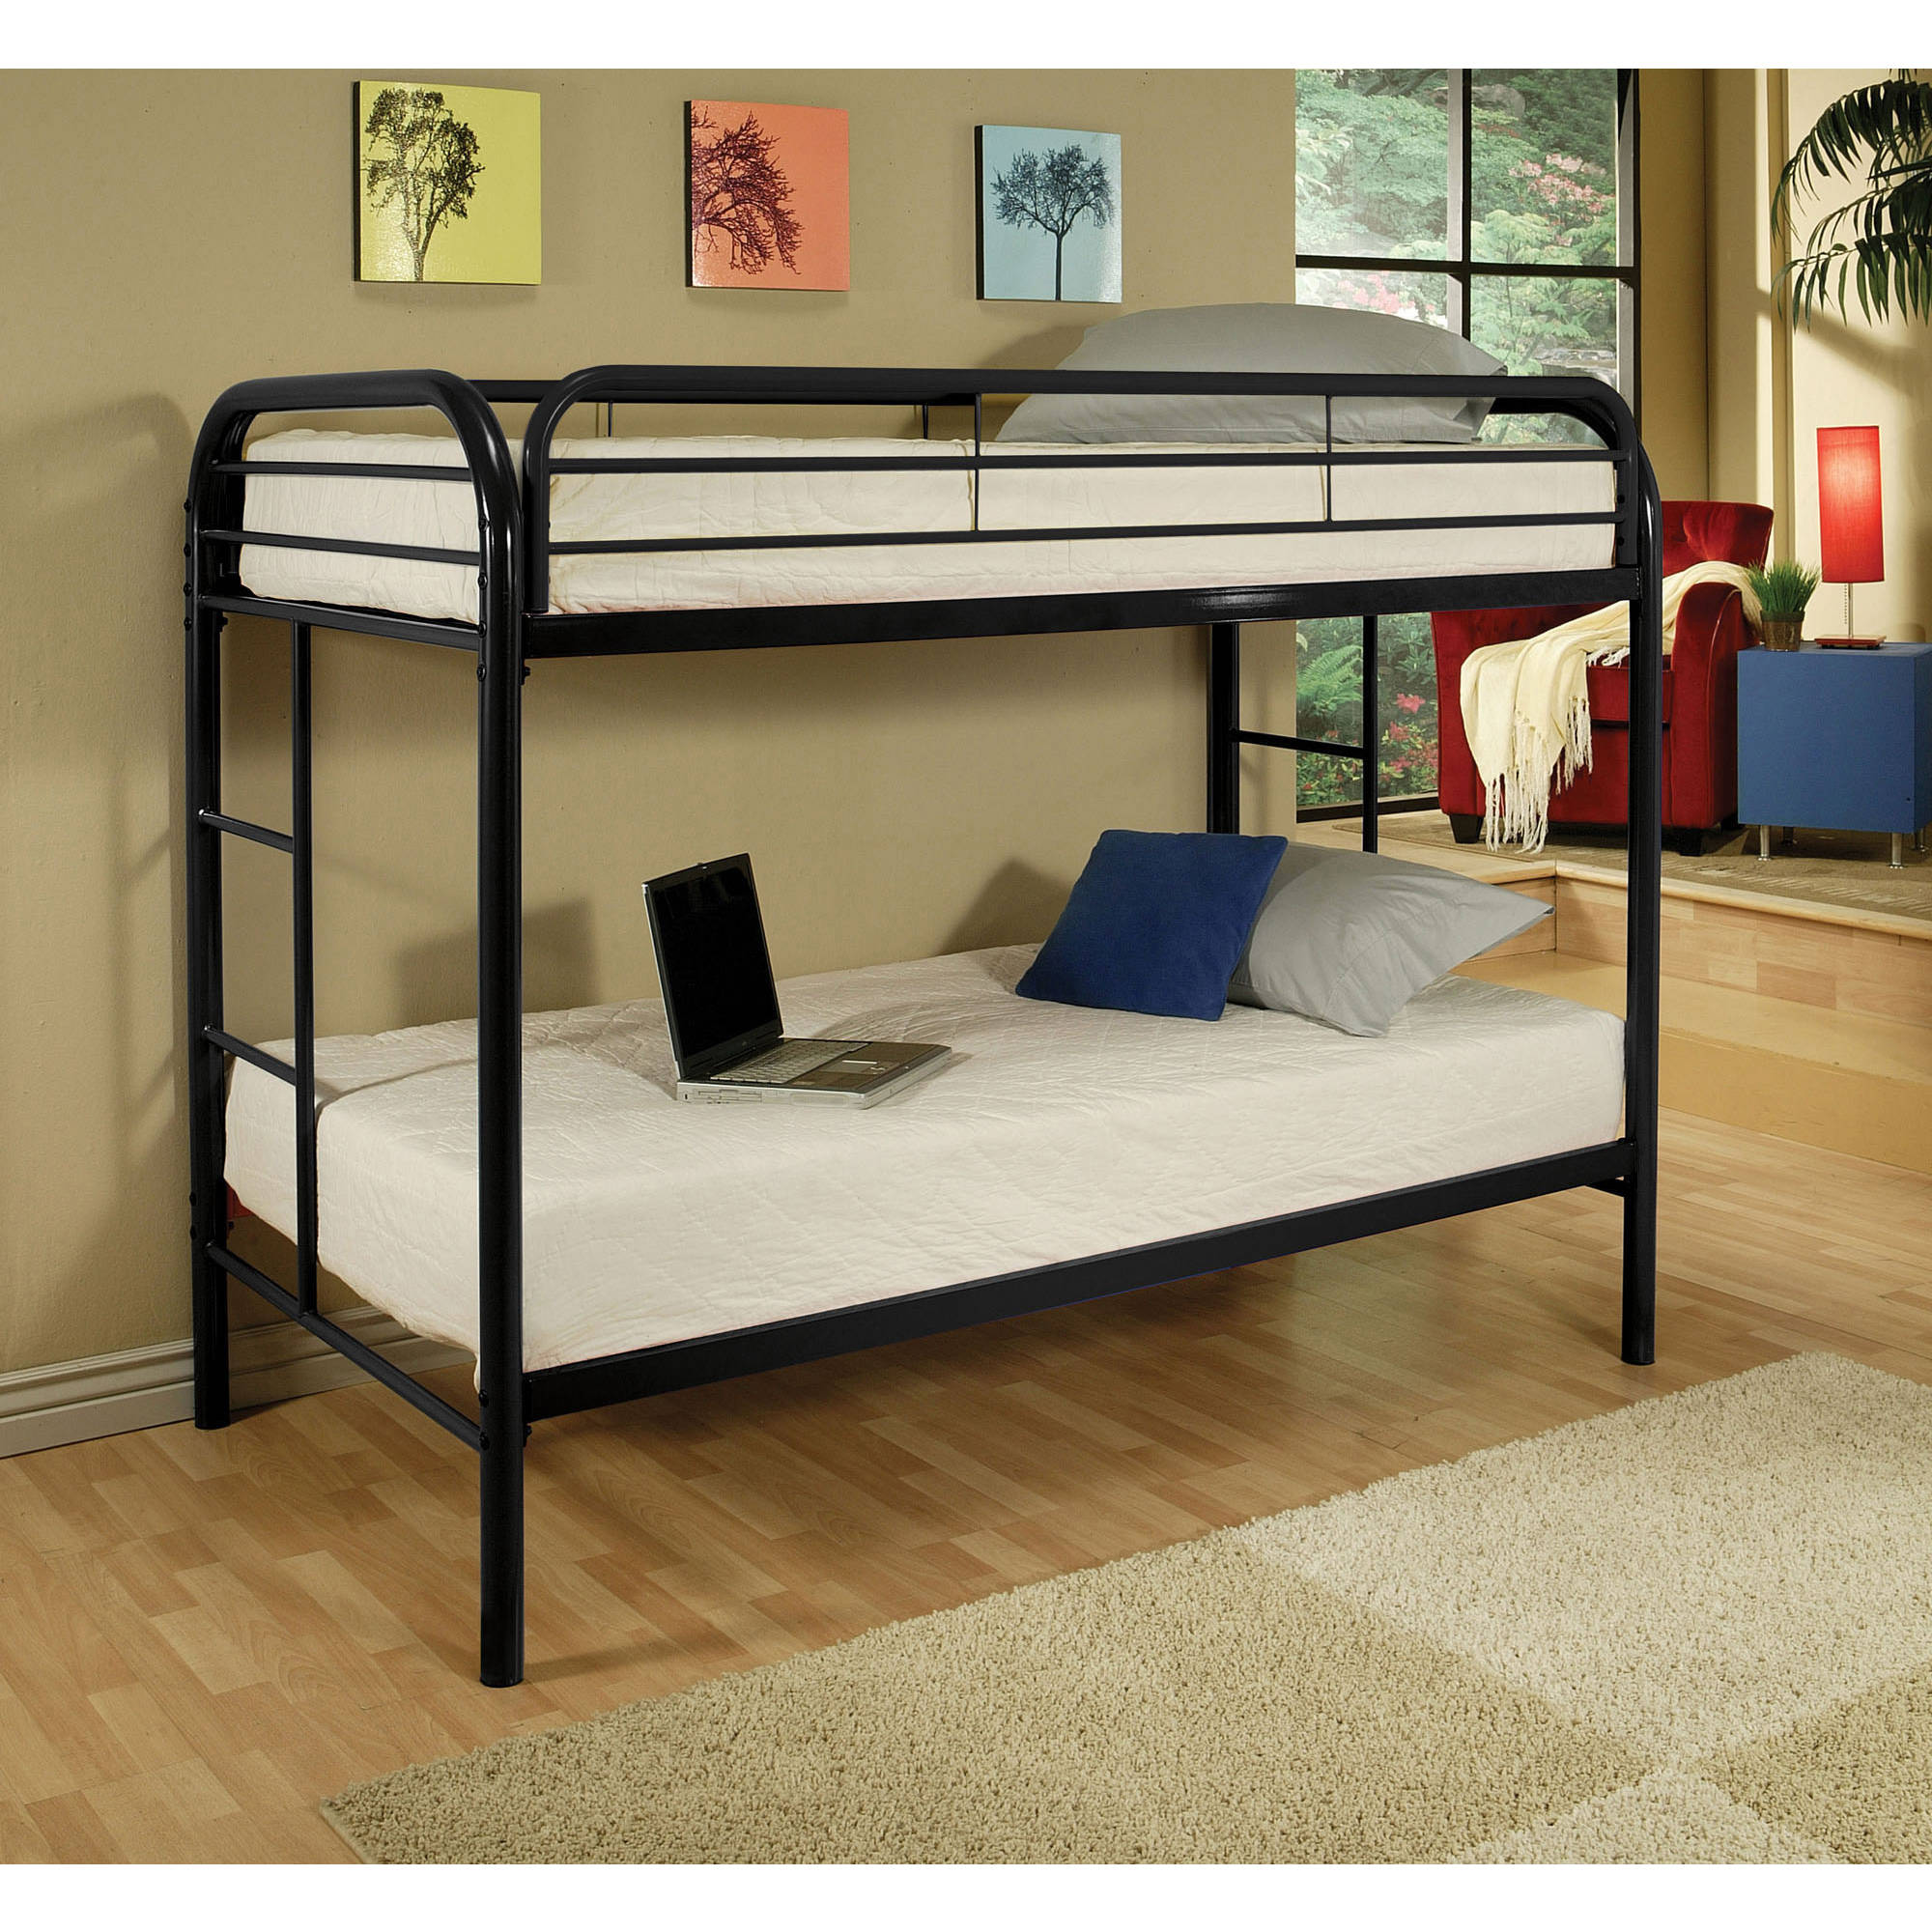 twin bunk beds for kids photo - 5